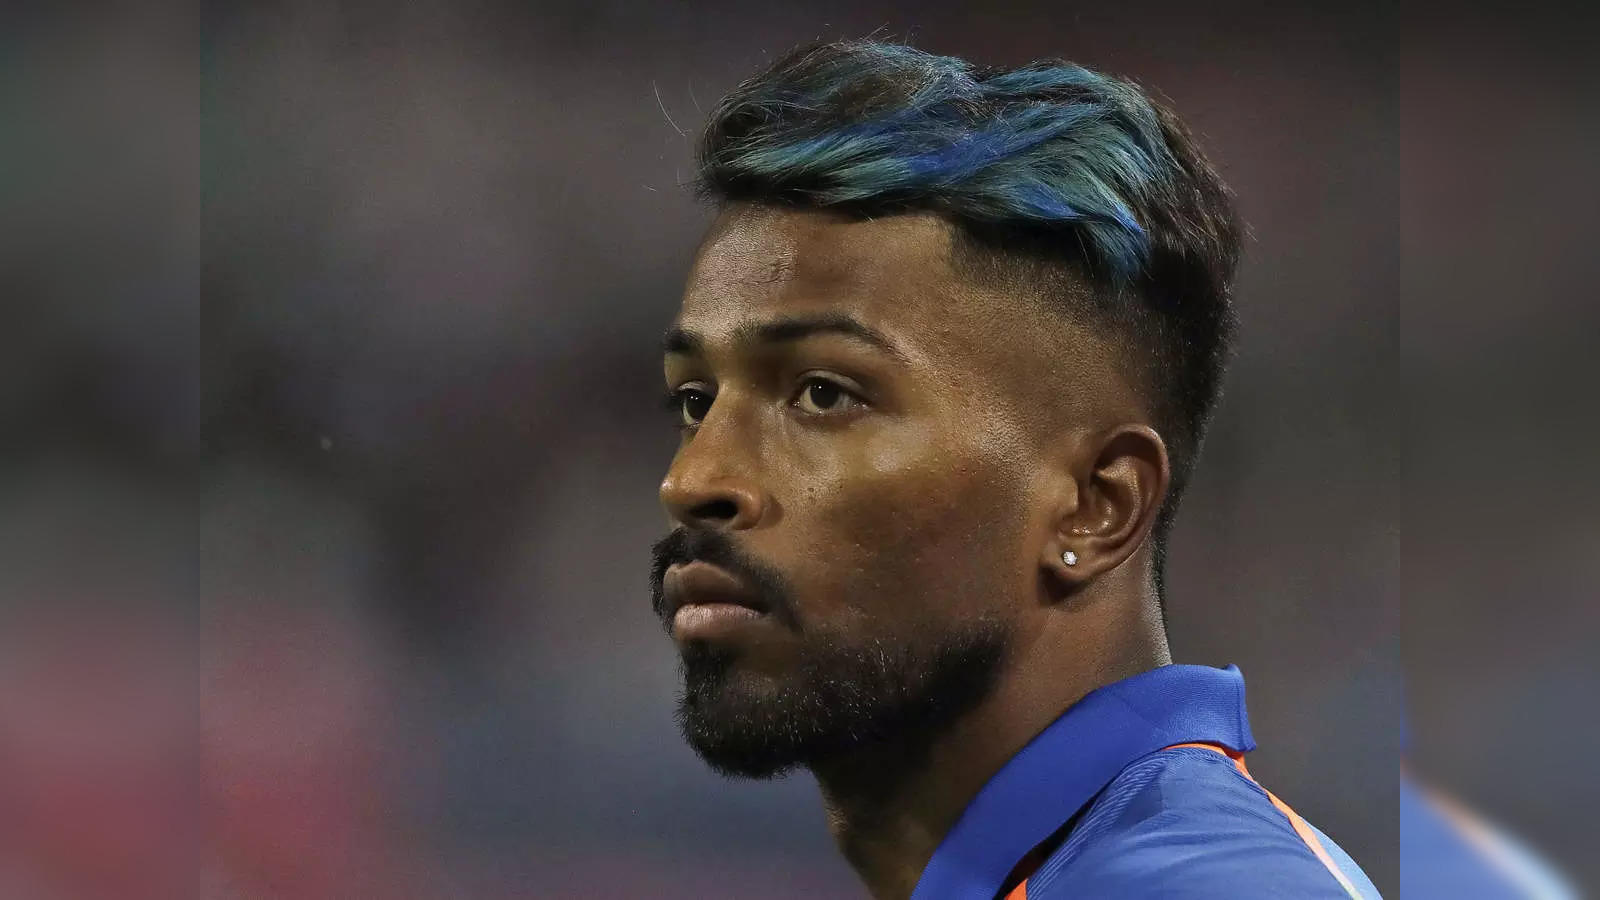 Customs seize luxury watches worth Rs 5 crores from Hardik Pandya